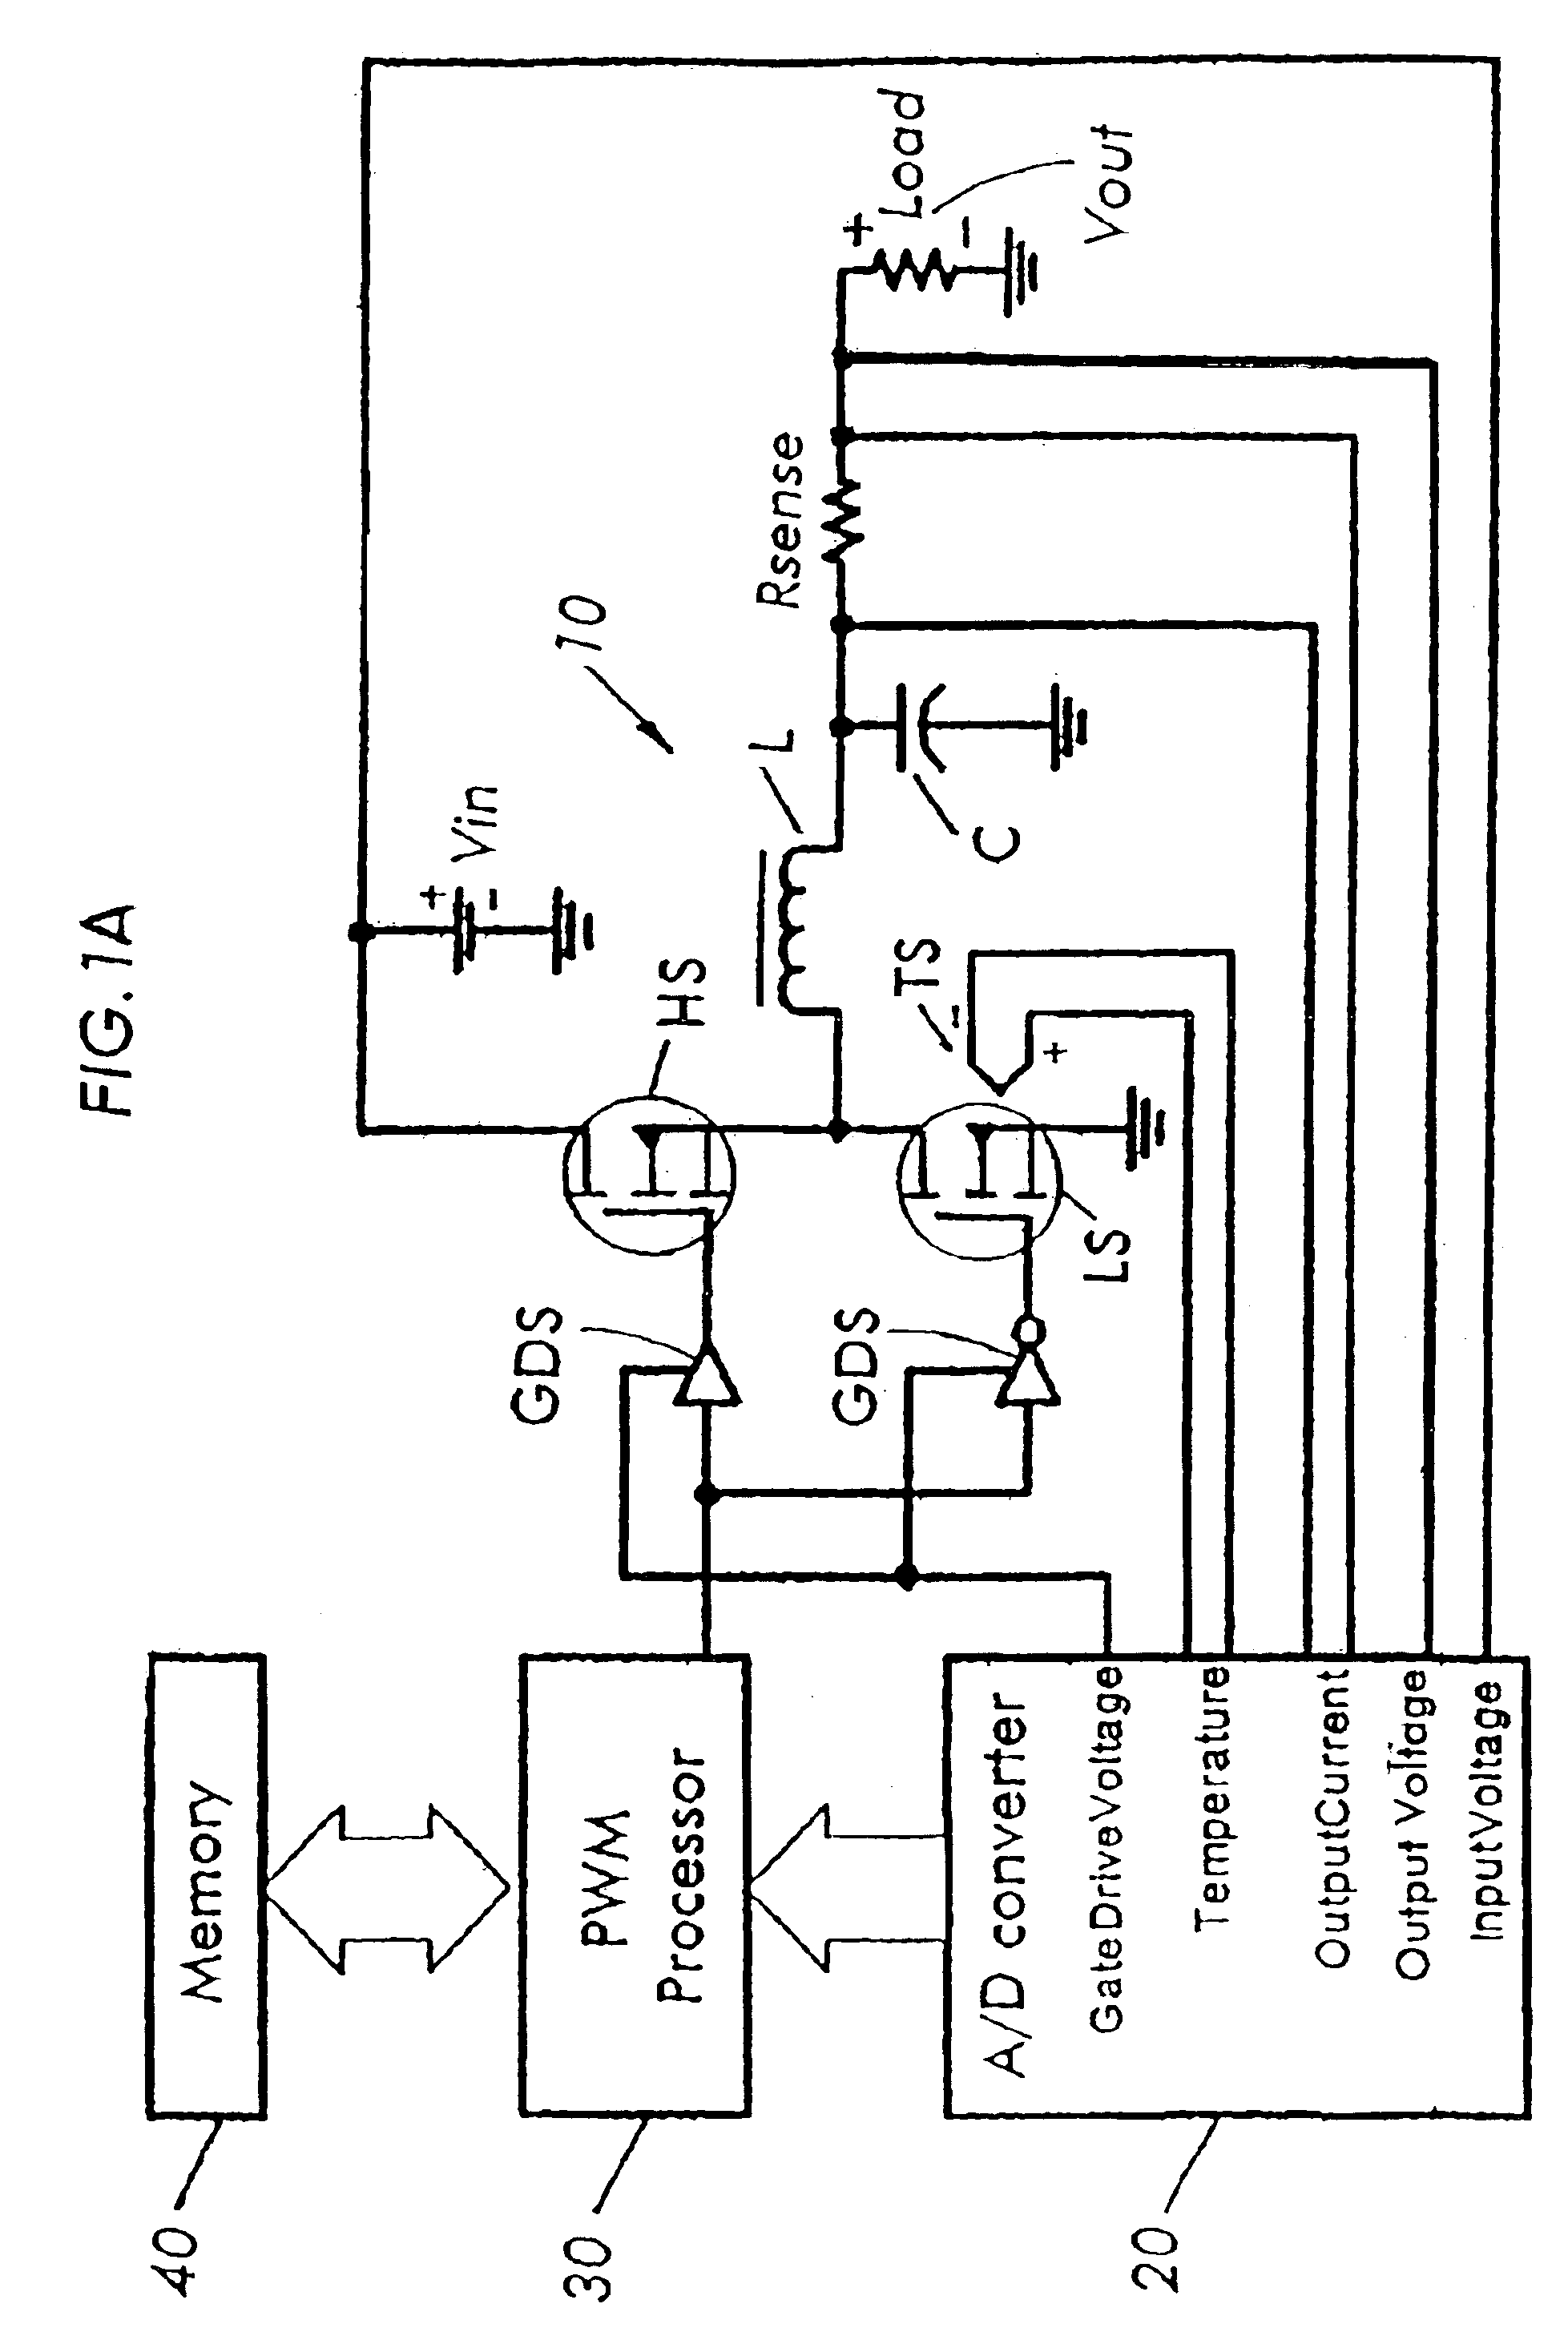 Total feed forward switching power supply control